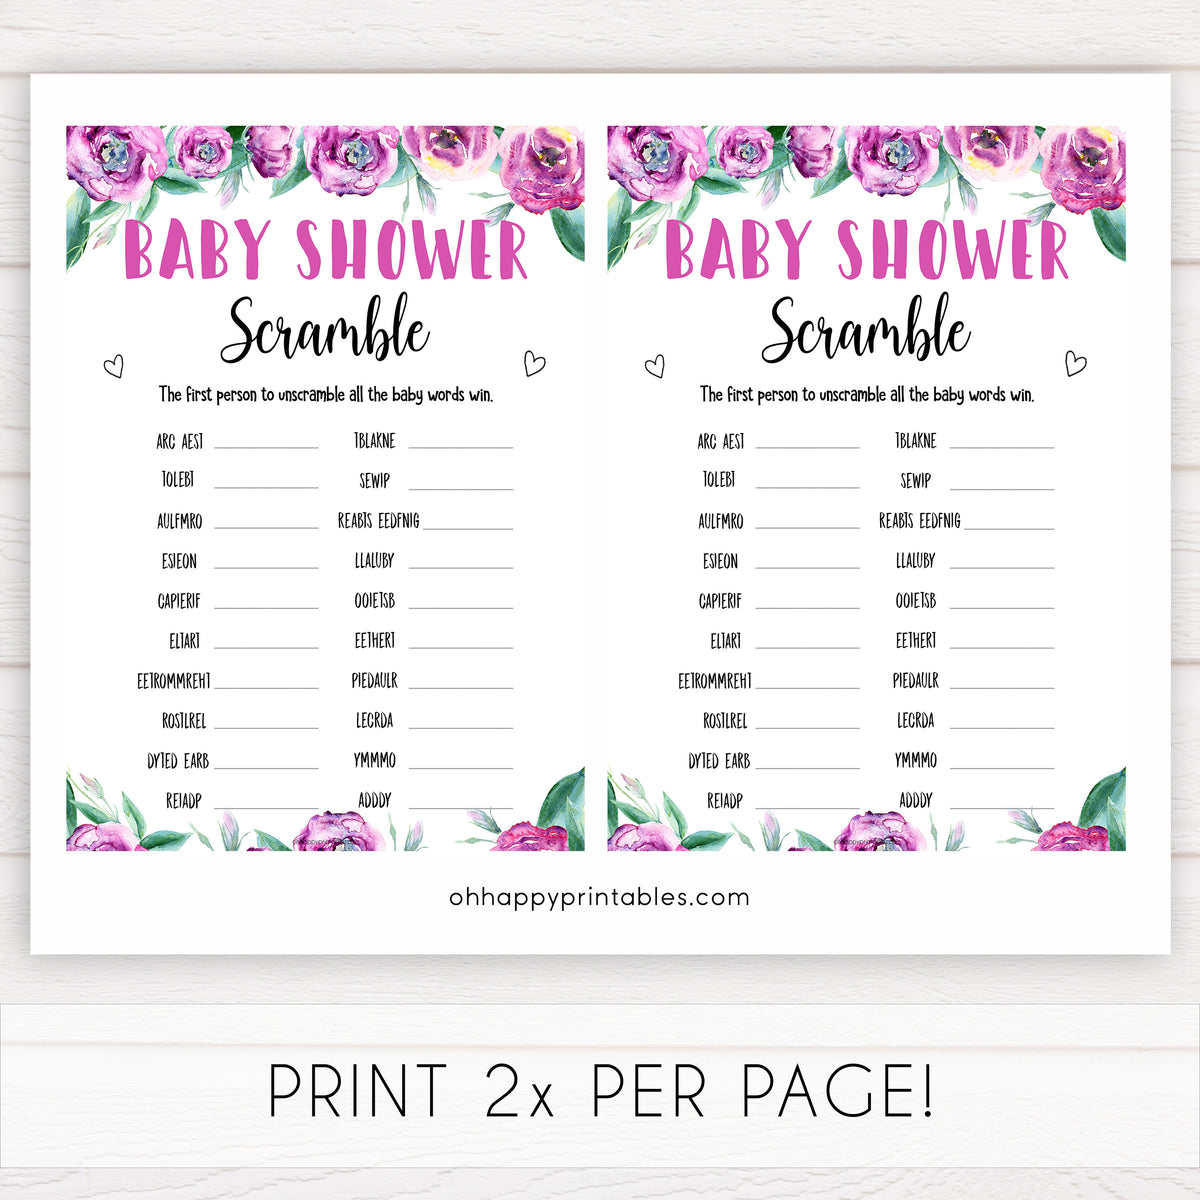 Baby shower games printable